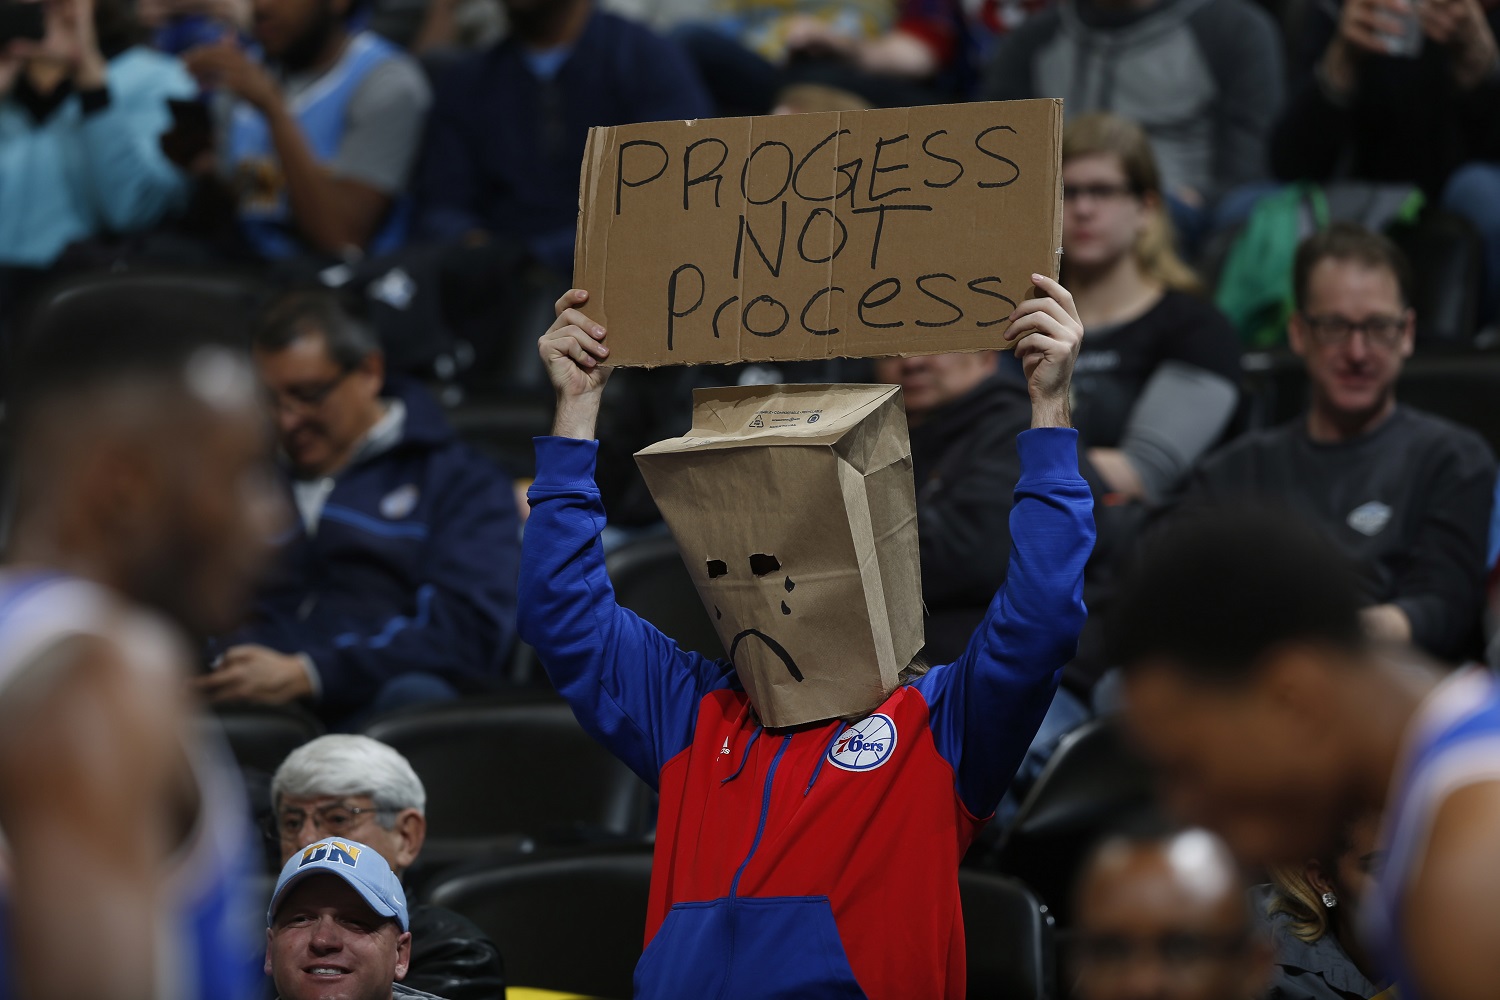 A Philadelphia 76ers fan wears a bag over his head and holds up a placard while watching his team face the Denver Nuggets in the first half of an NBA basketball game Wednesday, March 23, 2016, in Denver. (AP Photo/David Zalubowski)